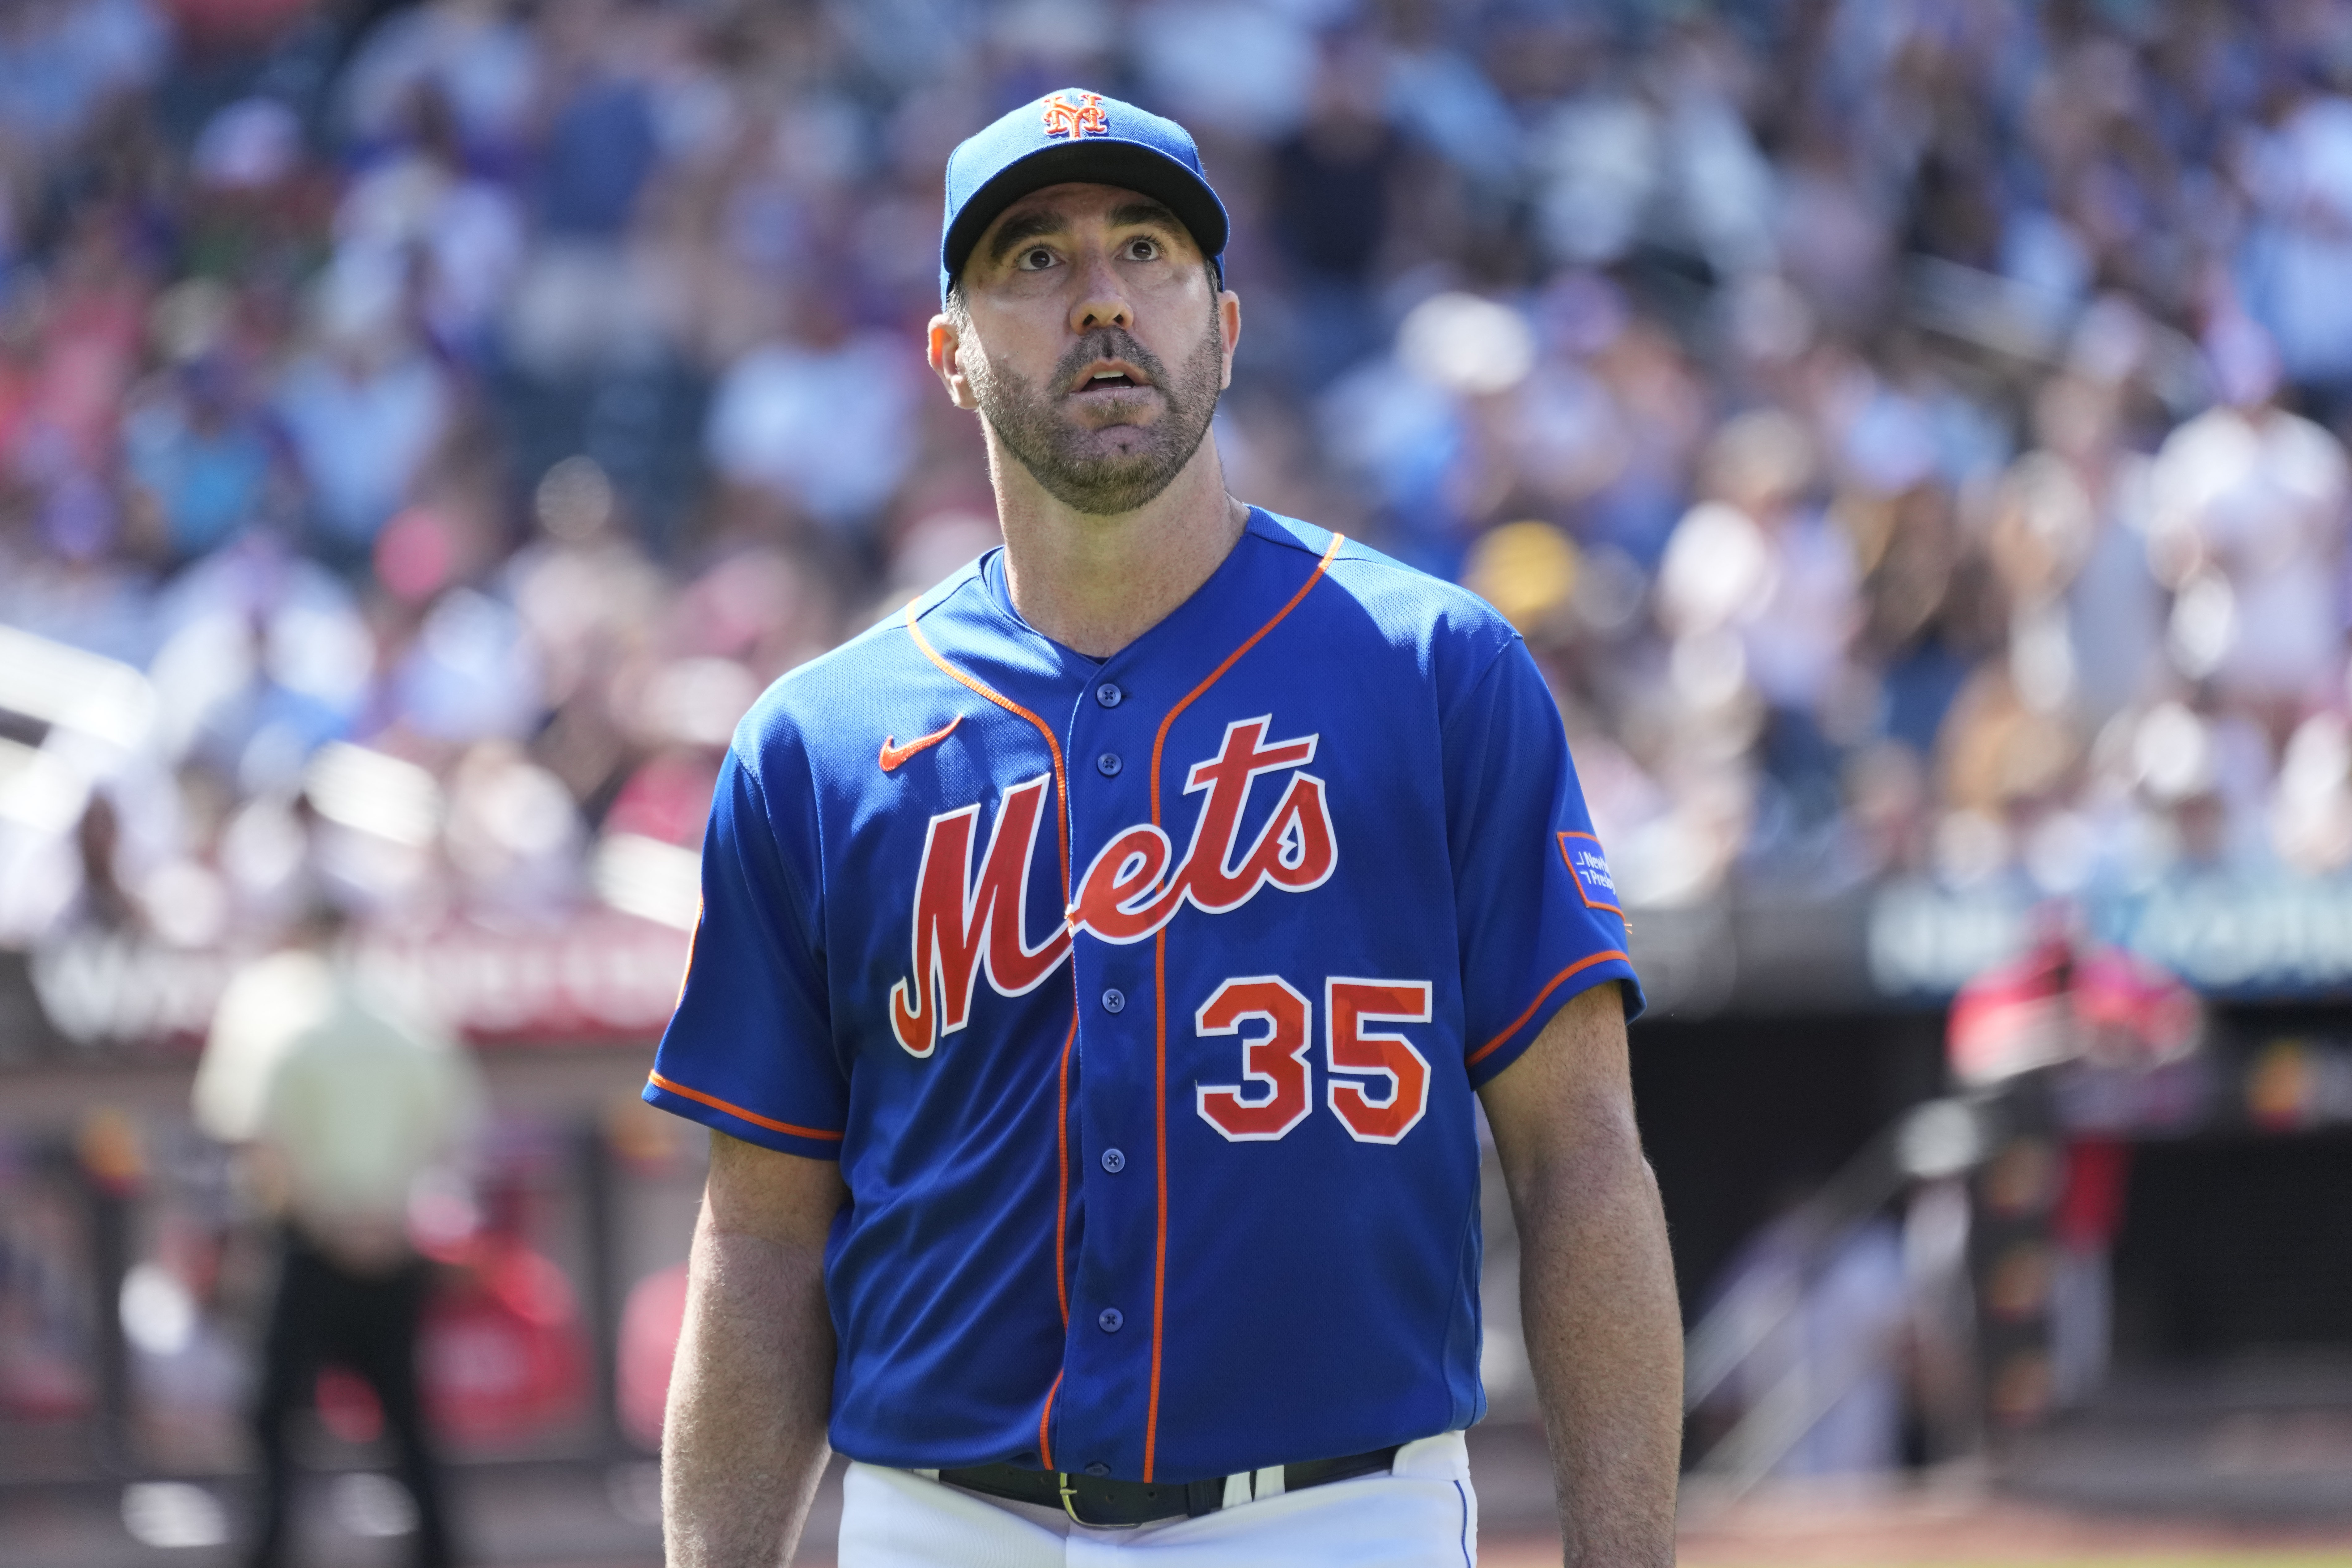 MLB Insider Says New York Mets Could Trade These Players - Sports